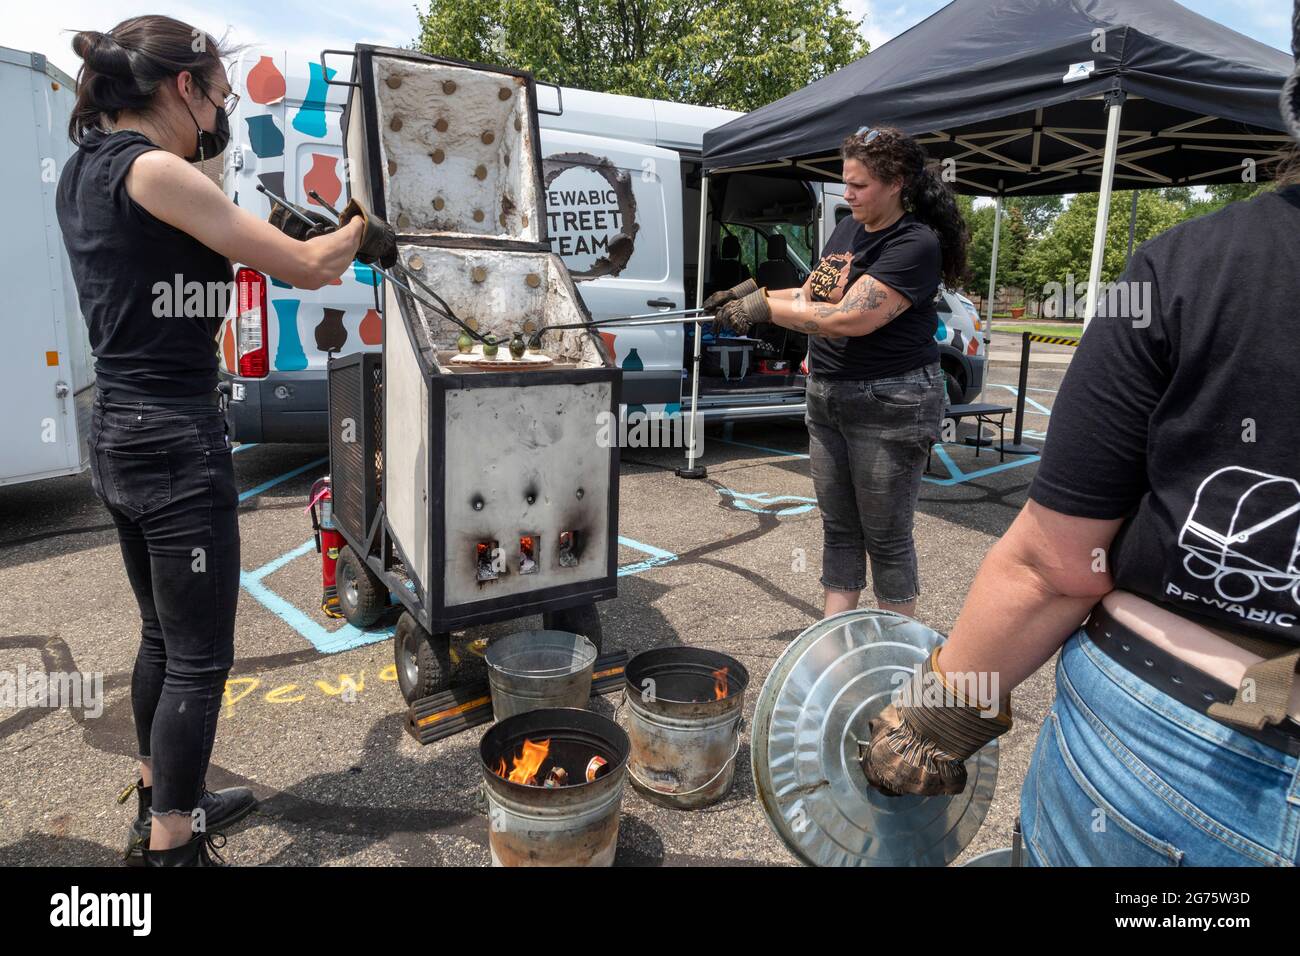 Detroit, Michigan - Members of the Pewabic Pottery Street Team demonstrate the Japanese technique of Raku Firing of pottery at a community arts and mu Stock Photo